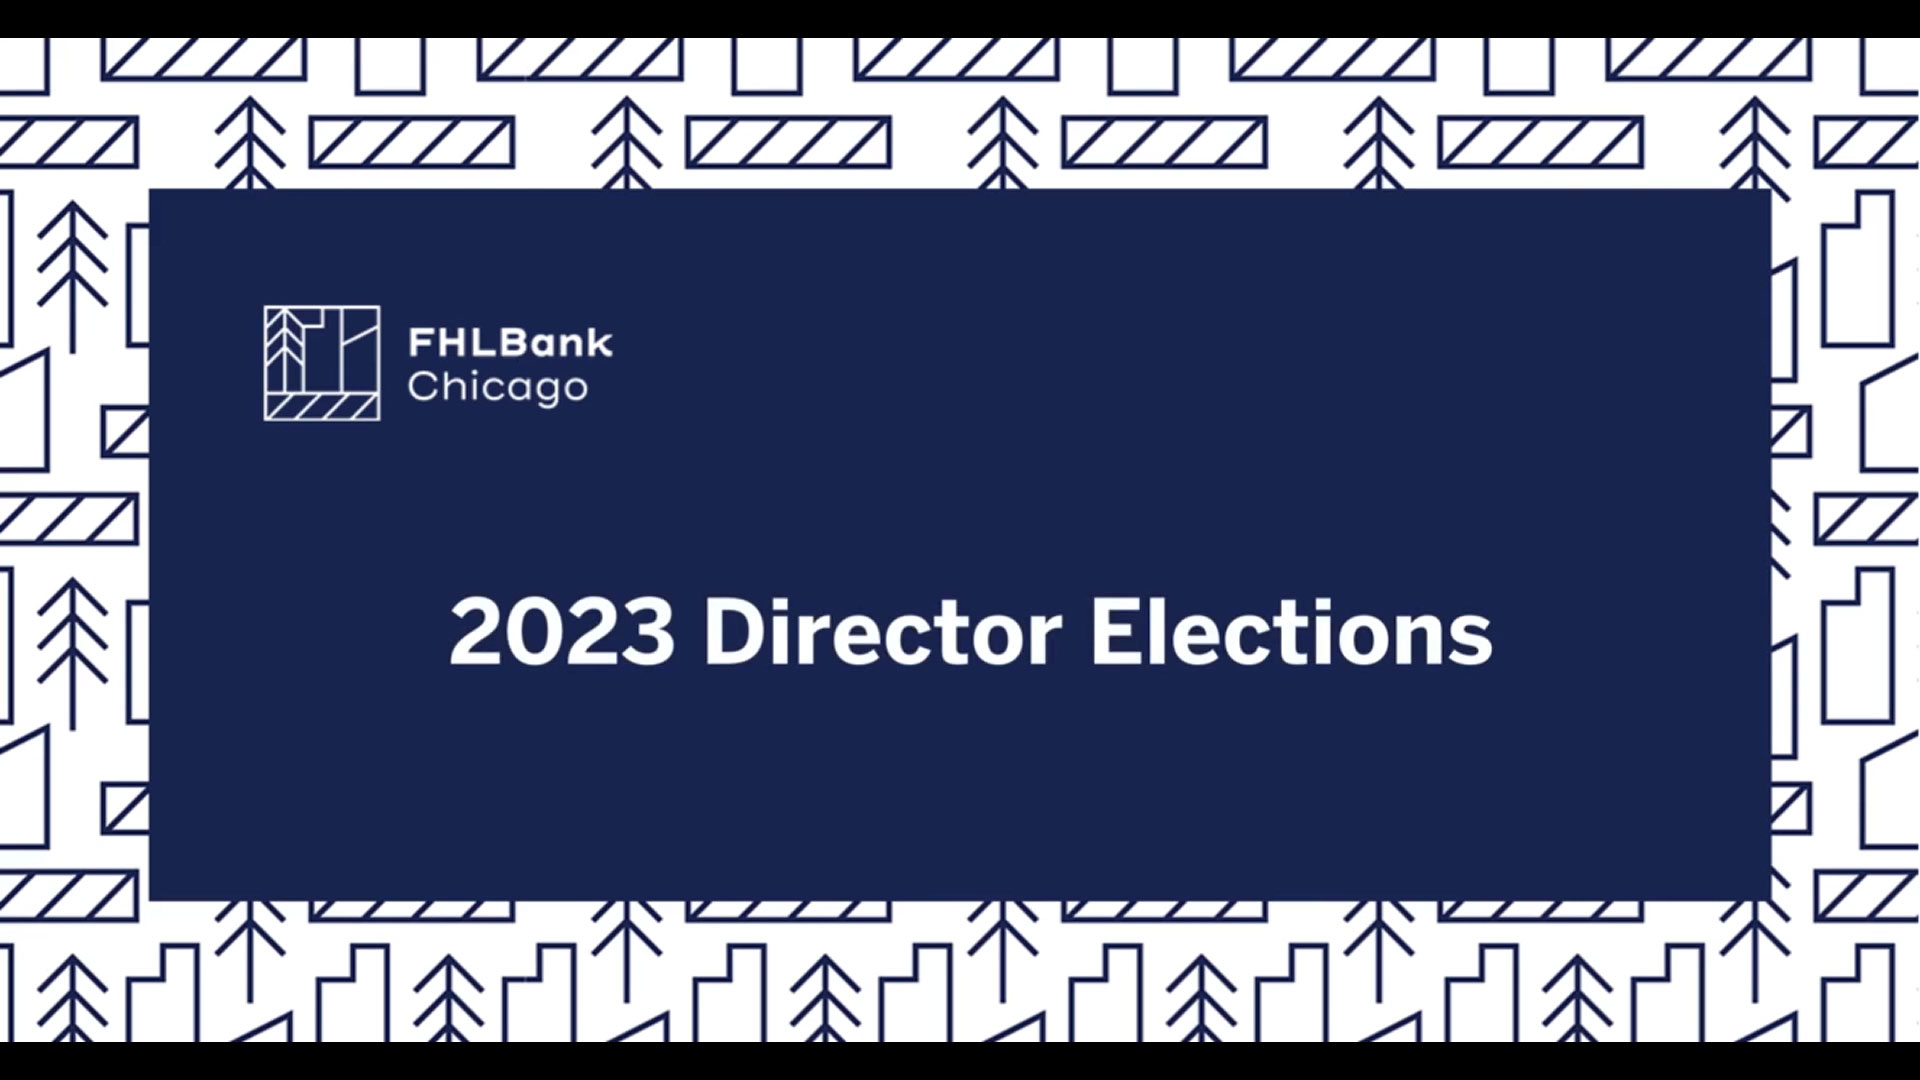 FHLBank Chicago is pleased to announce the results of our 2023 Director Election! We’re delighted to welcome Kathy Burns and Kenneth D. Thompson as newly appointed directors, and we look forward to continuing our work alongside reappointed directors, Phyllis Lockett, David J. Loundy, and Lois Alison Scott.